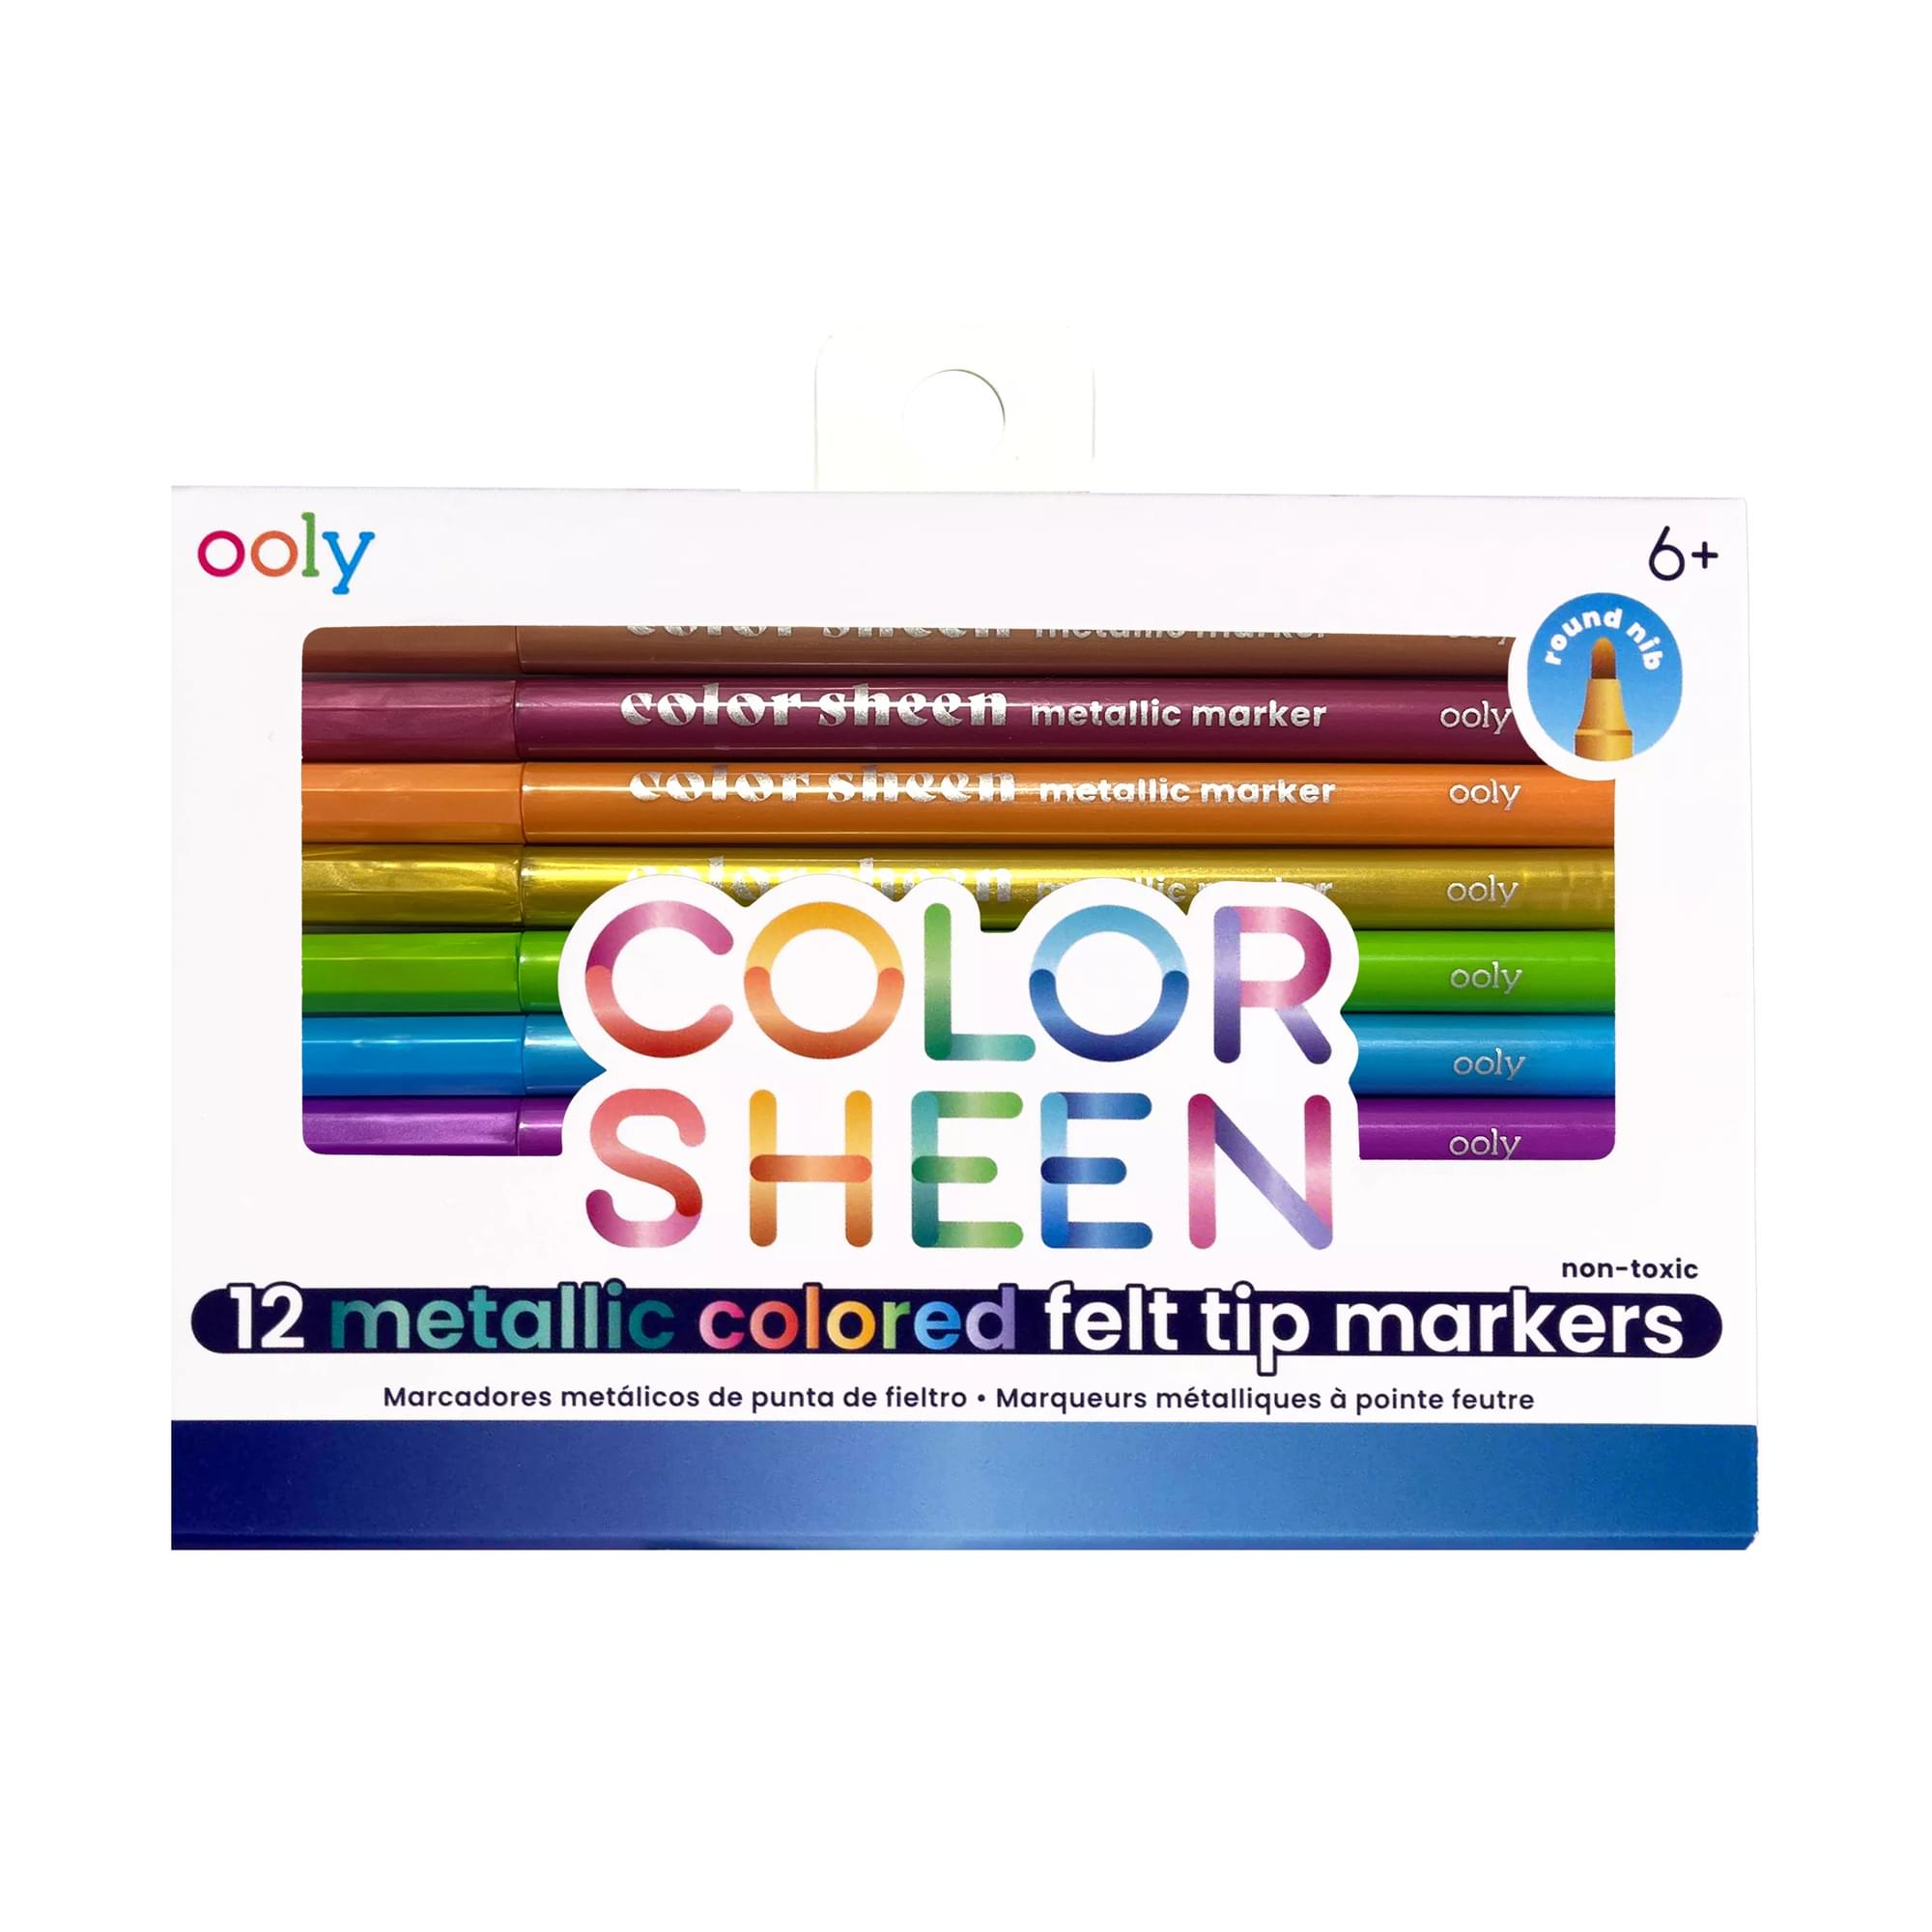 Switch-eroo Color Changing Markers – The Library Store